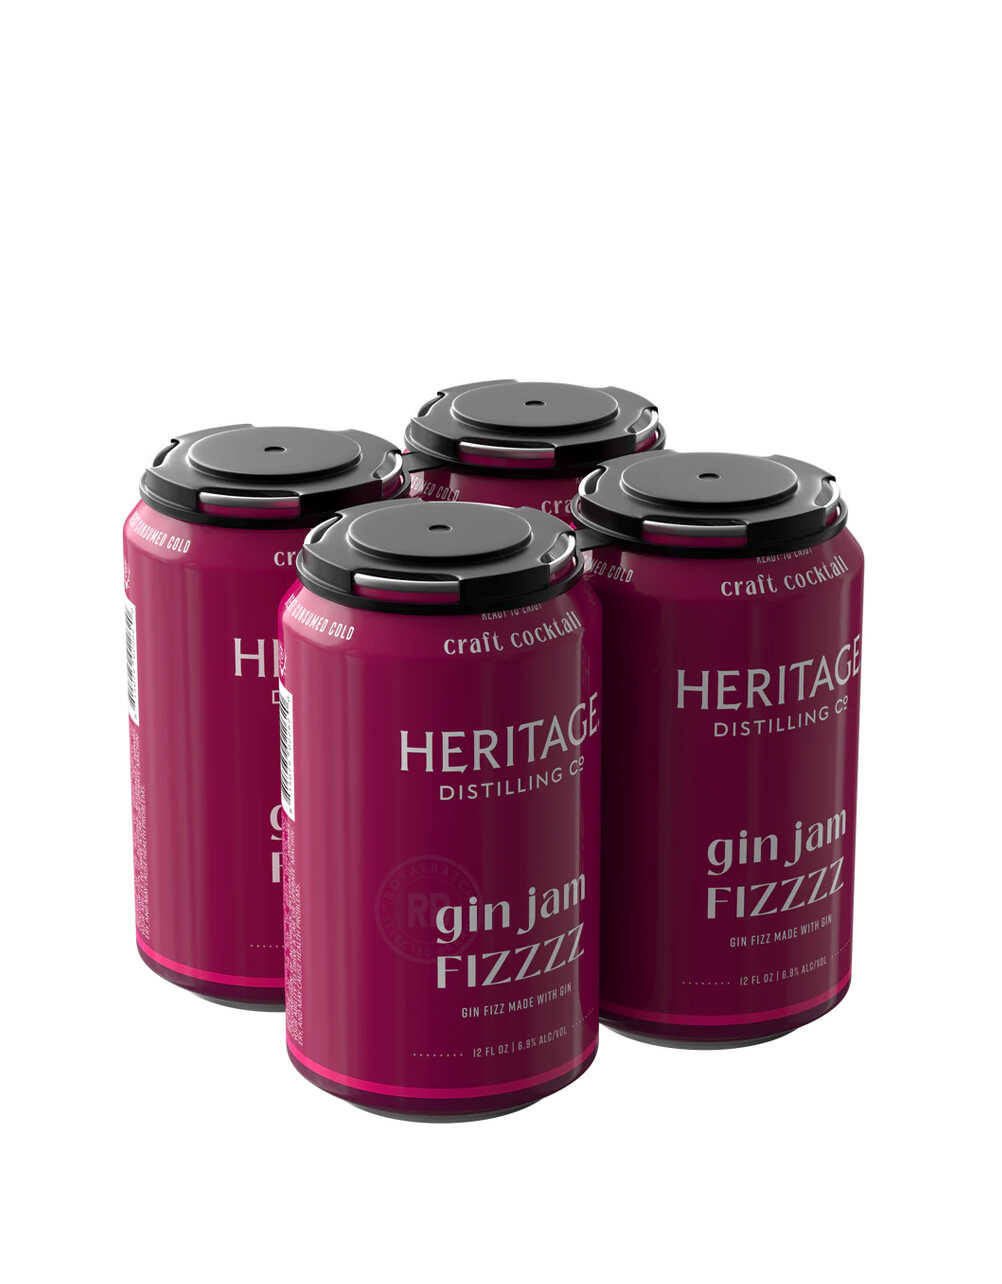 Heritage Distilling Co Gin Jam Fizzzz (4 Pack) x 12oz